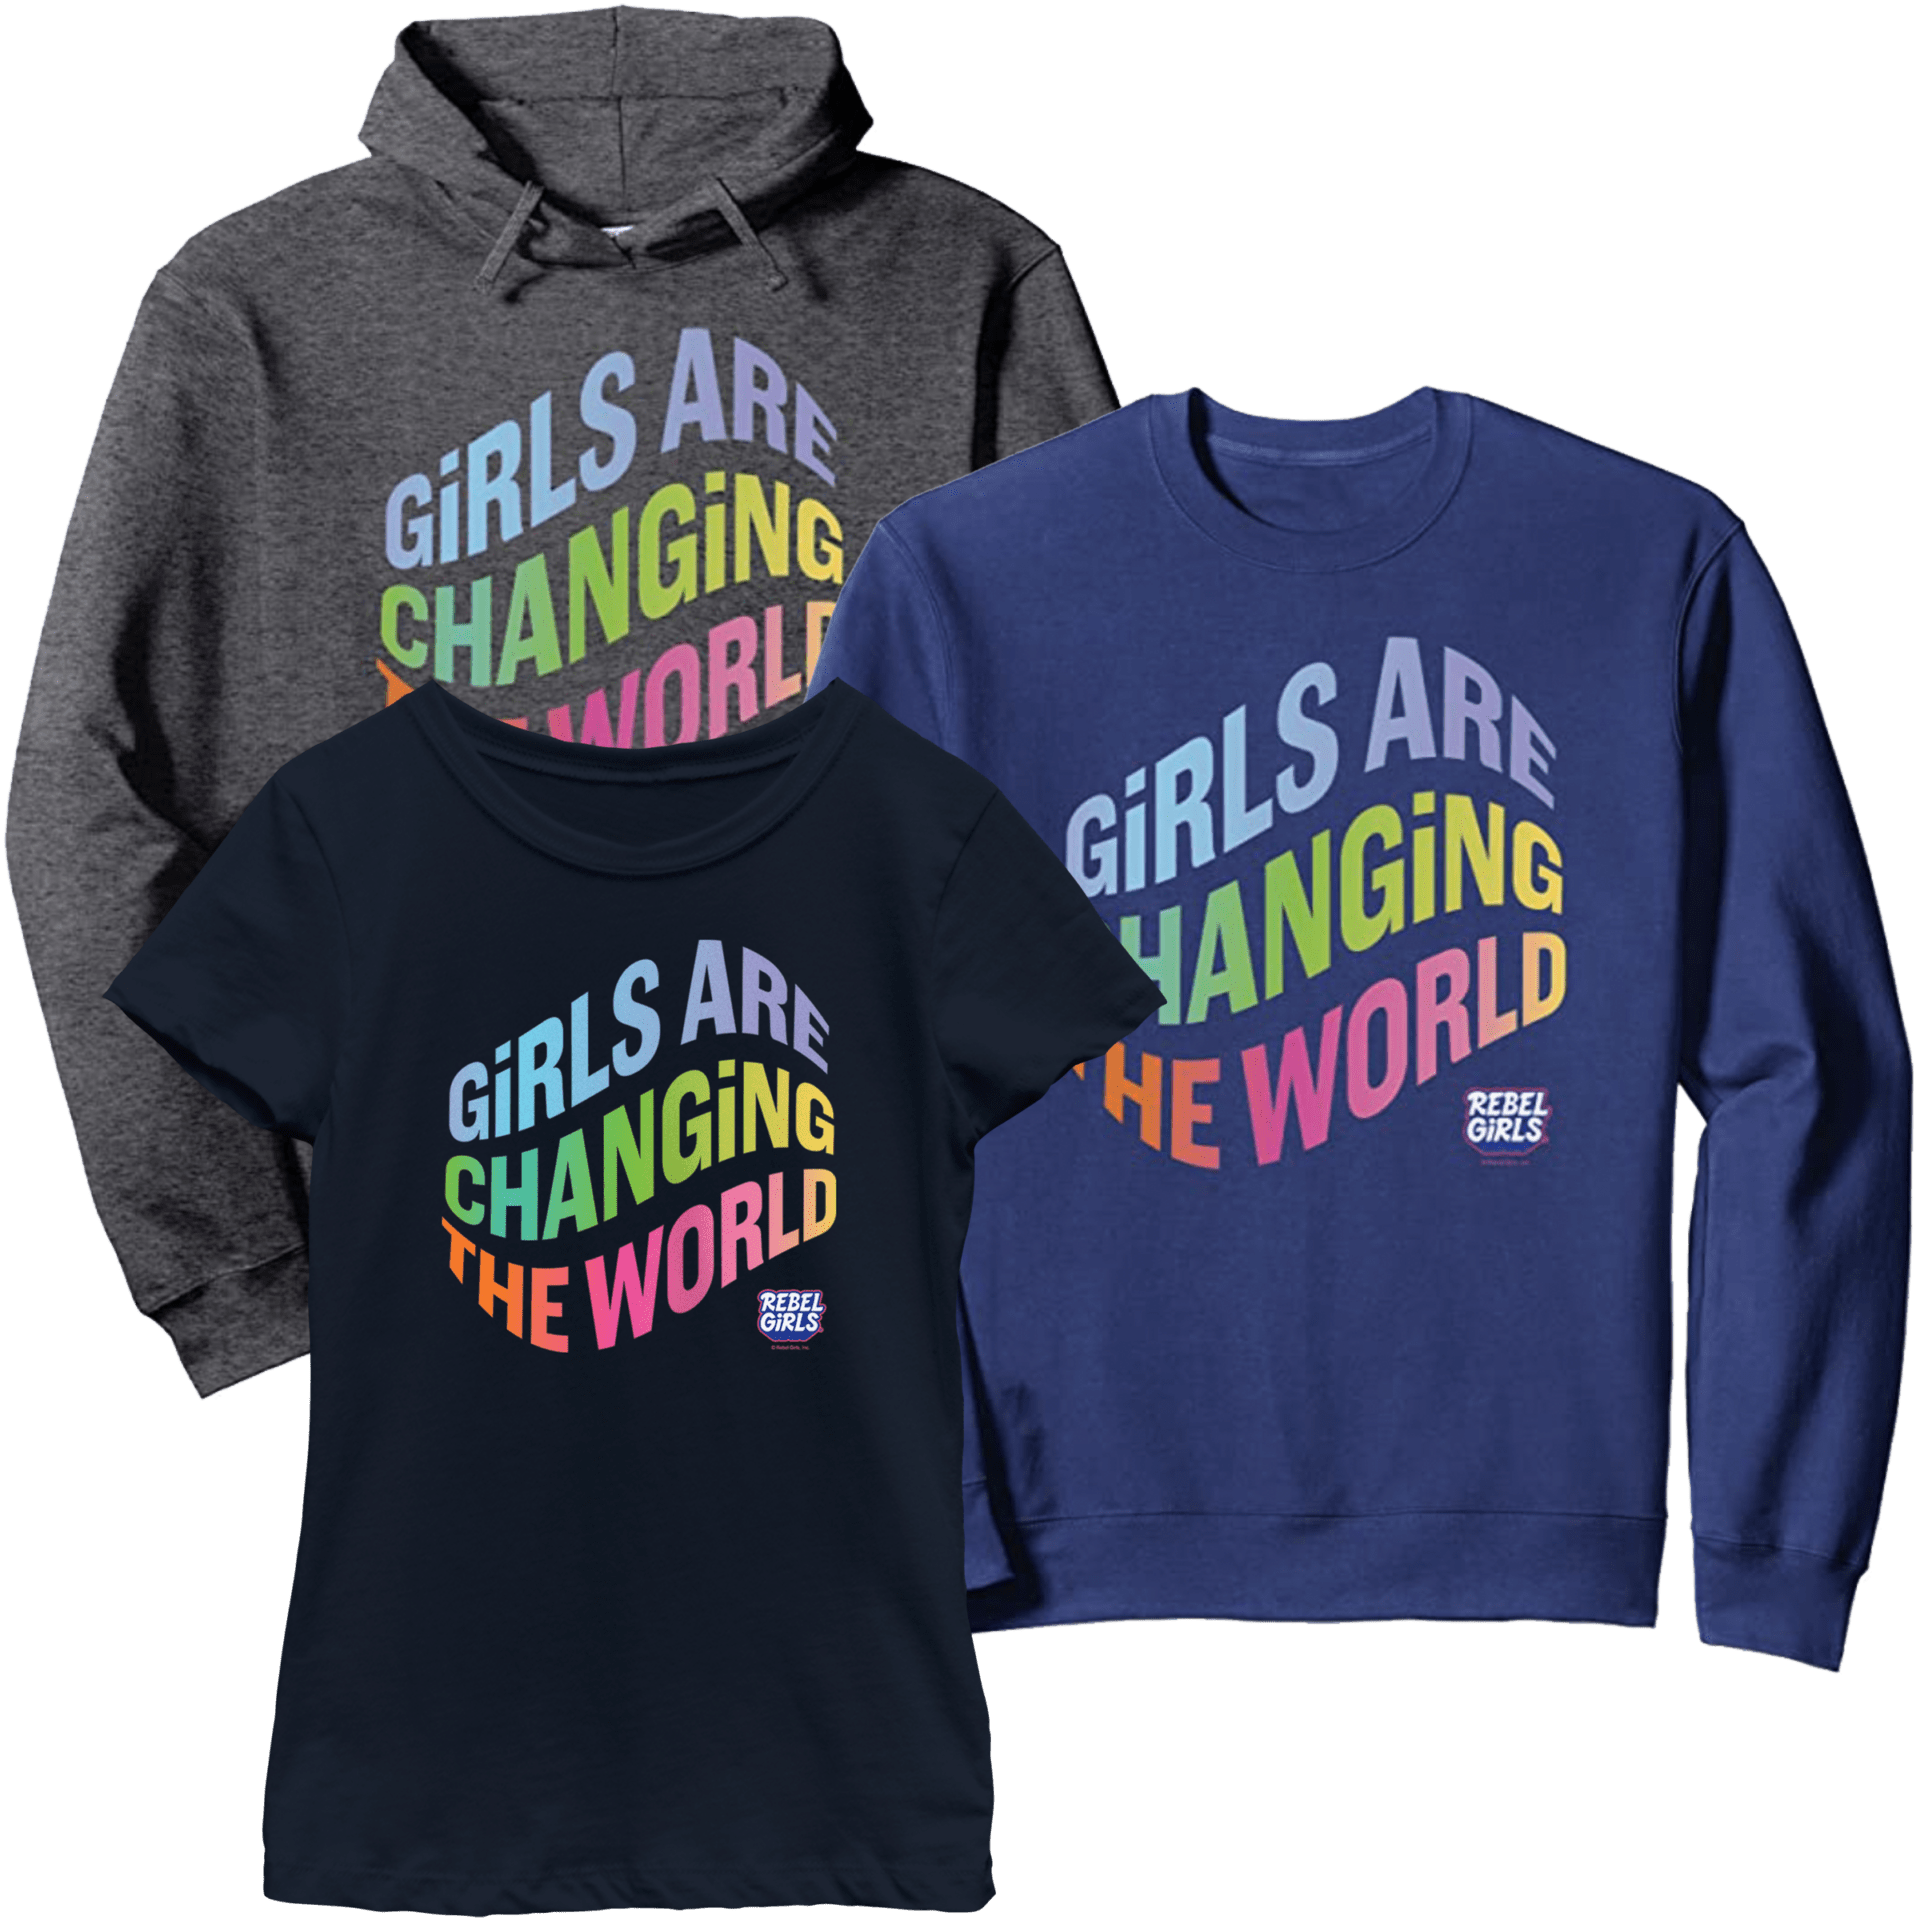 &#8220;Girls are Changing the World&#8221; Tees and Tops